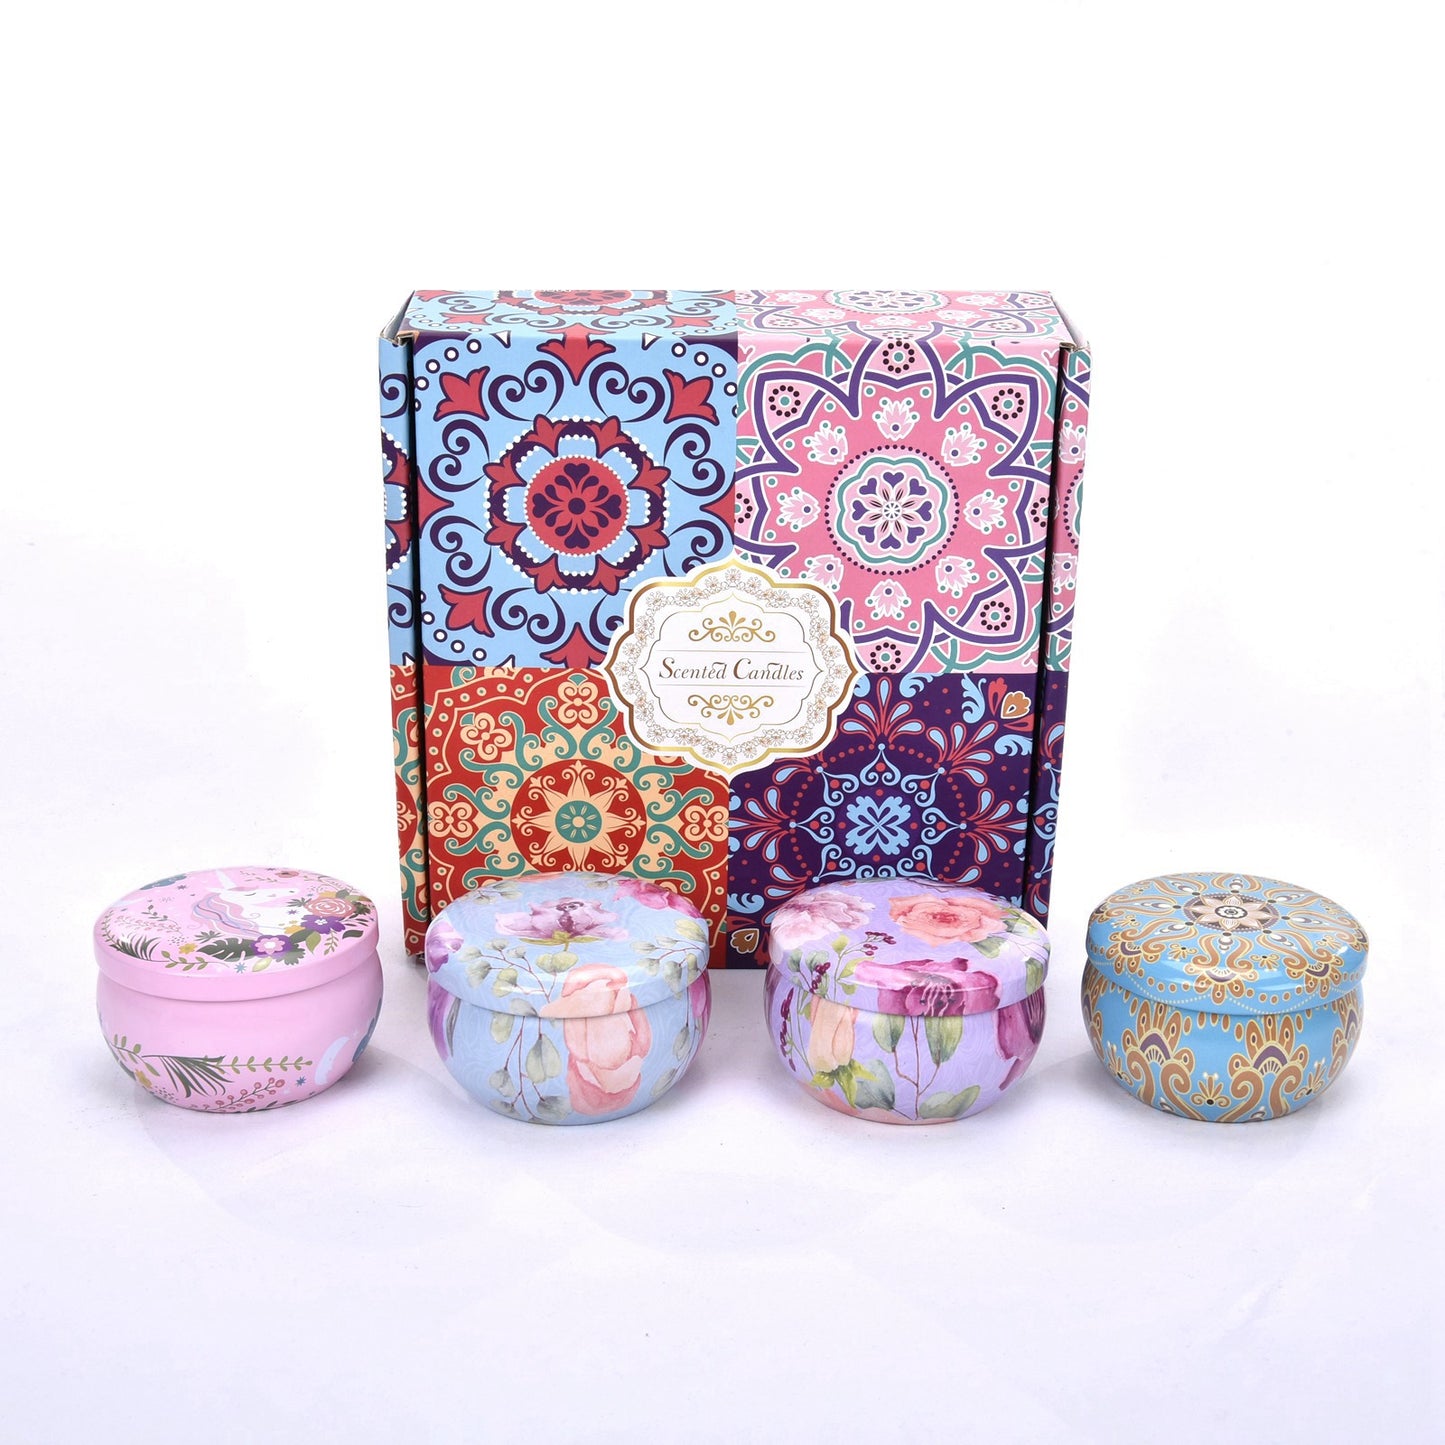 Lollipop4u Scented Candles 4-Piece Candle Gift Set